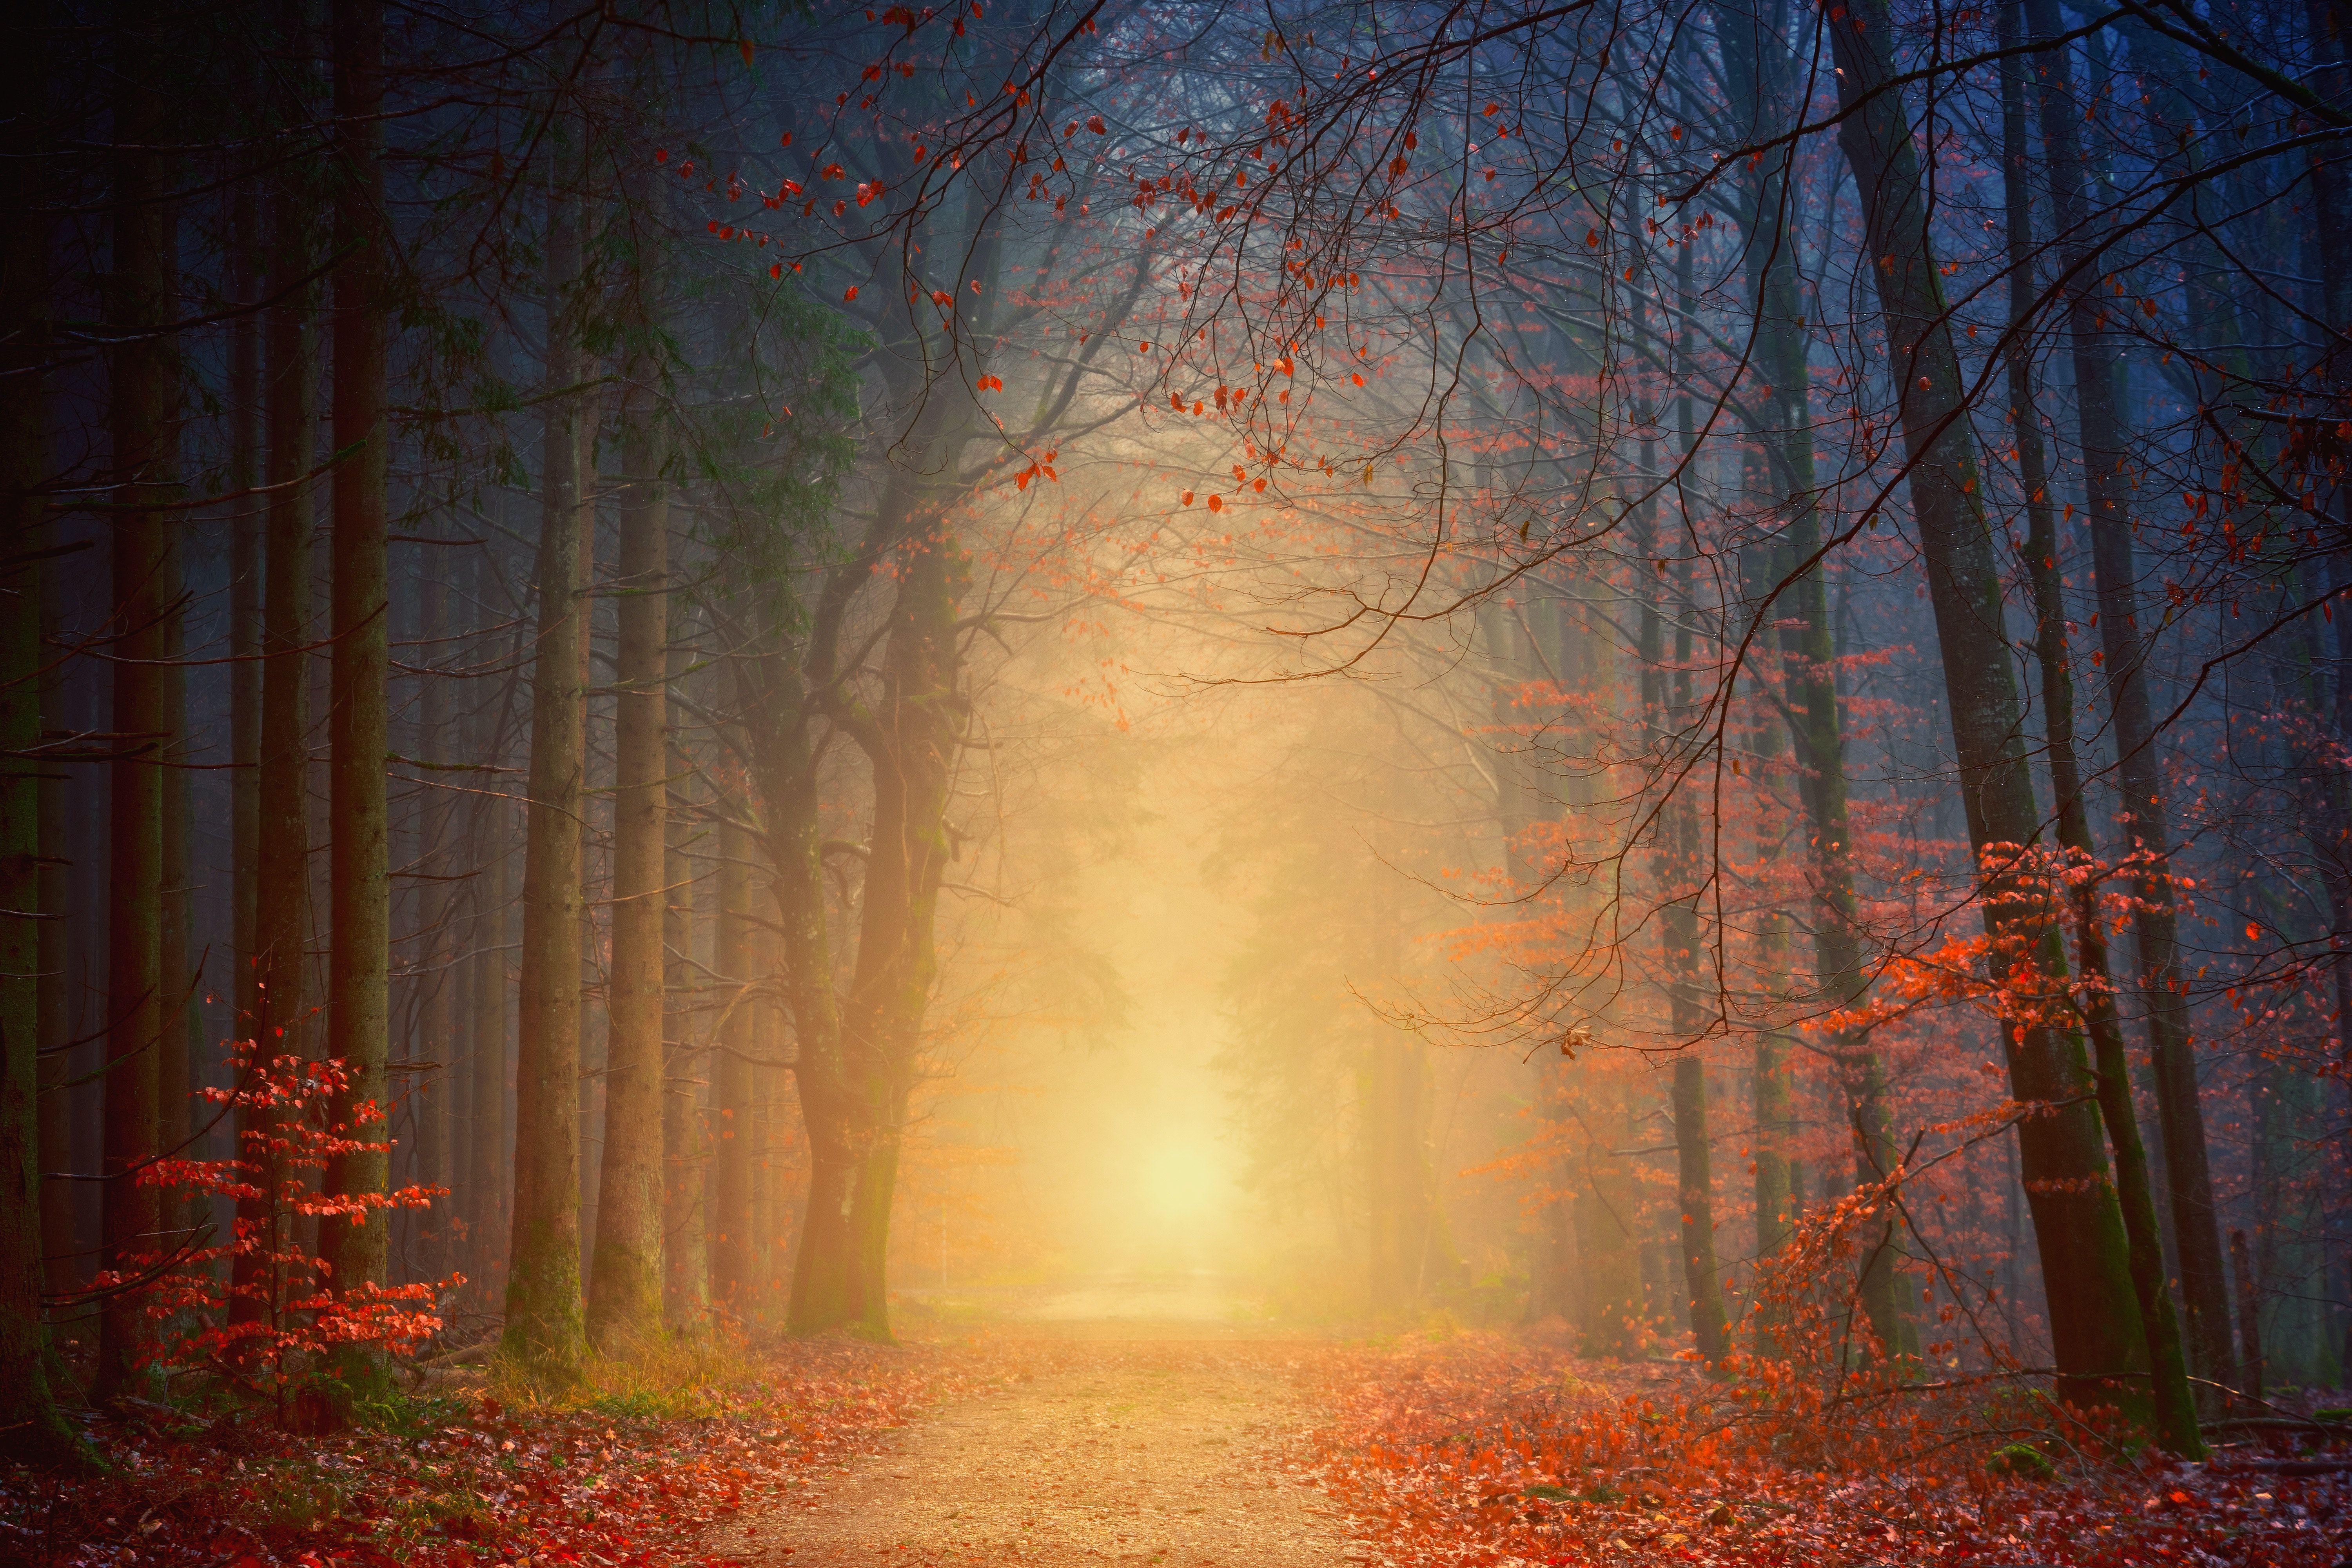 Forest 4K Wallpaper, Autumn, Foggy, Dawn, Pathway, Road, Fall foliage, 5K, Nature